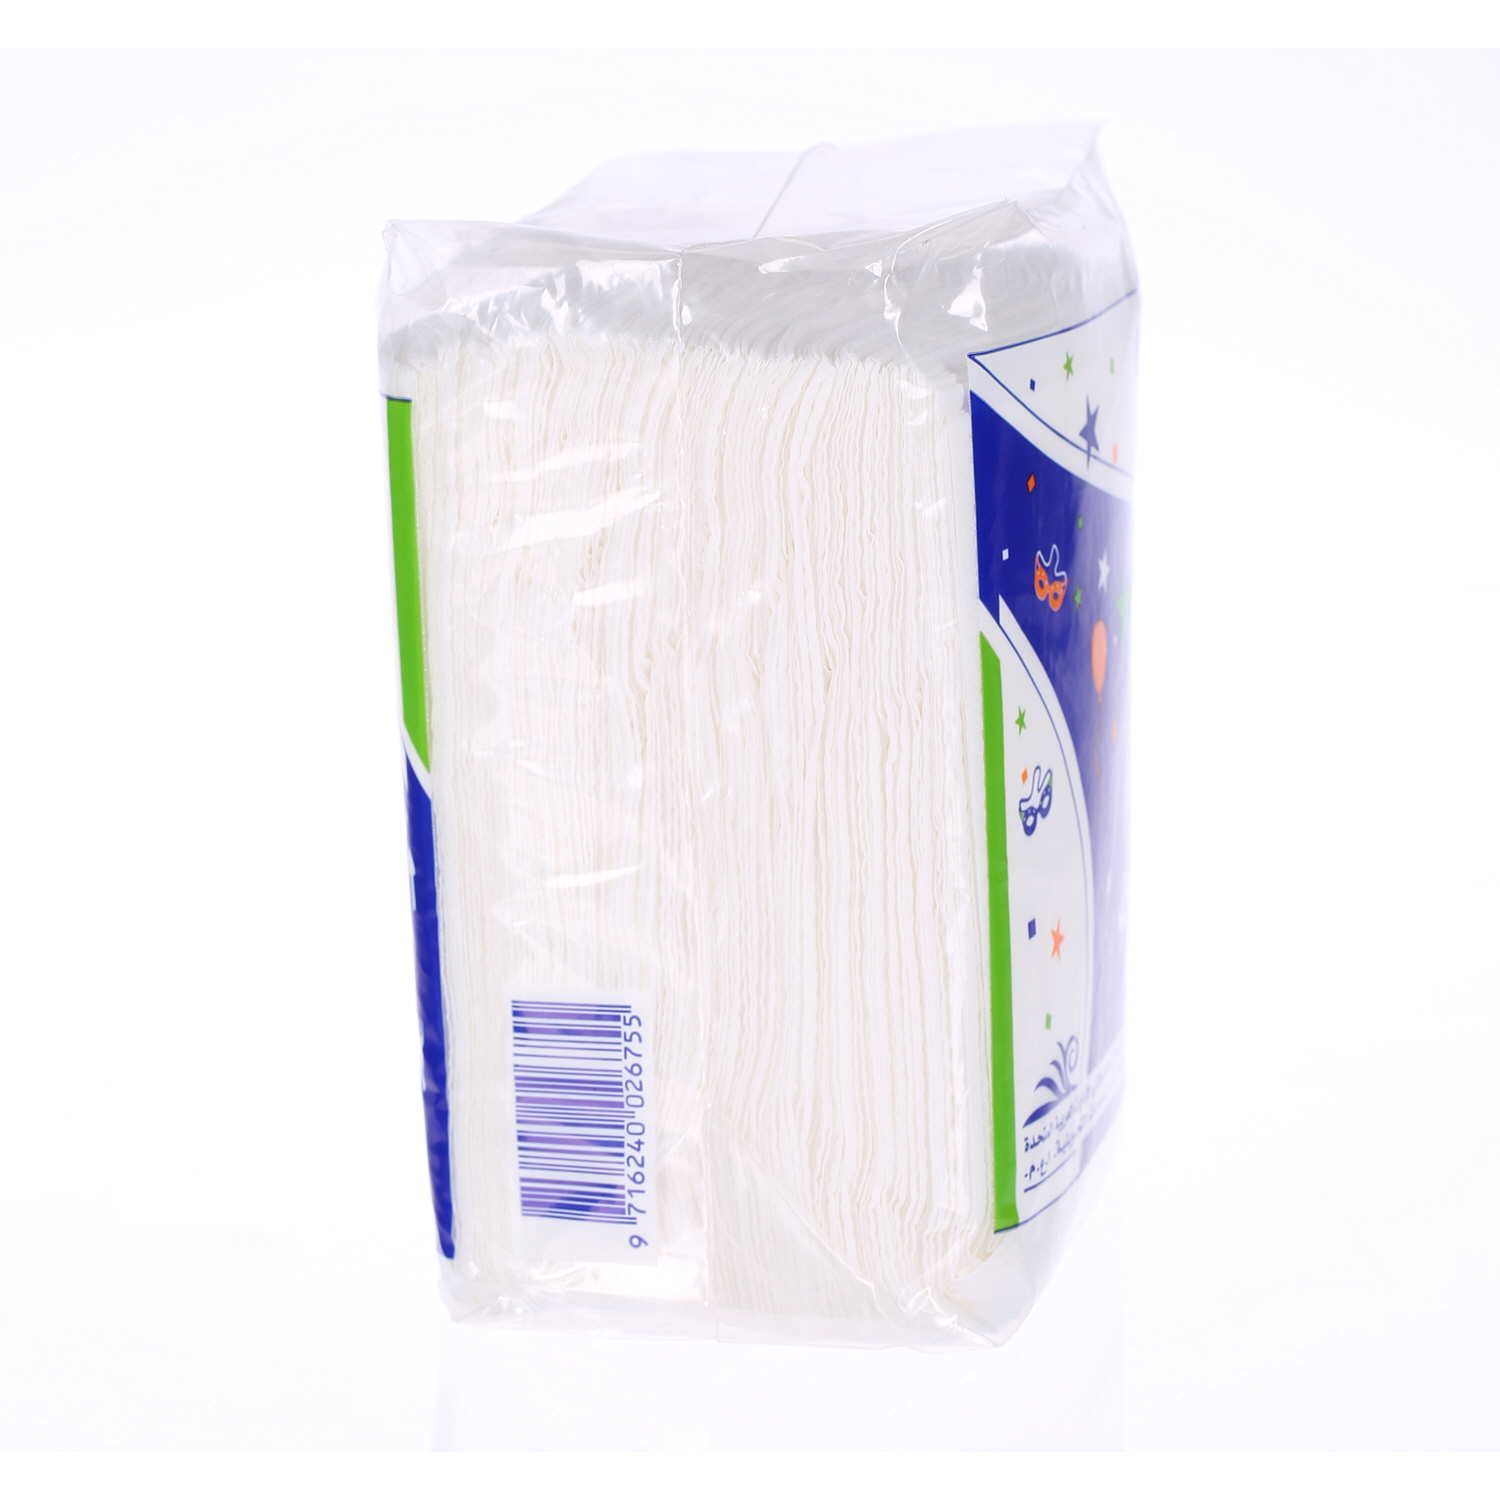 Co-Op Paper Napkins 1 Ply x 100 Pack